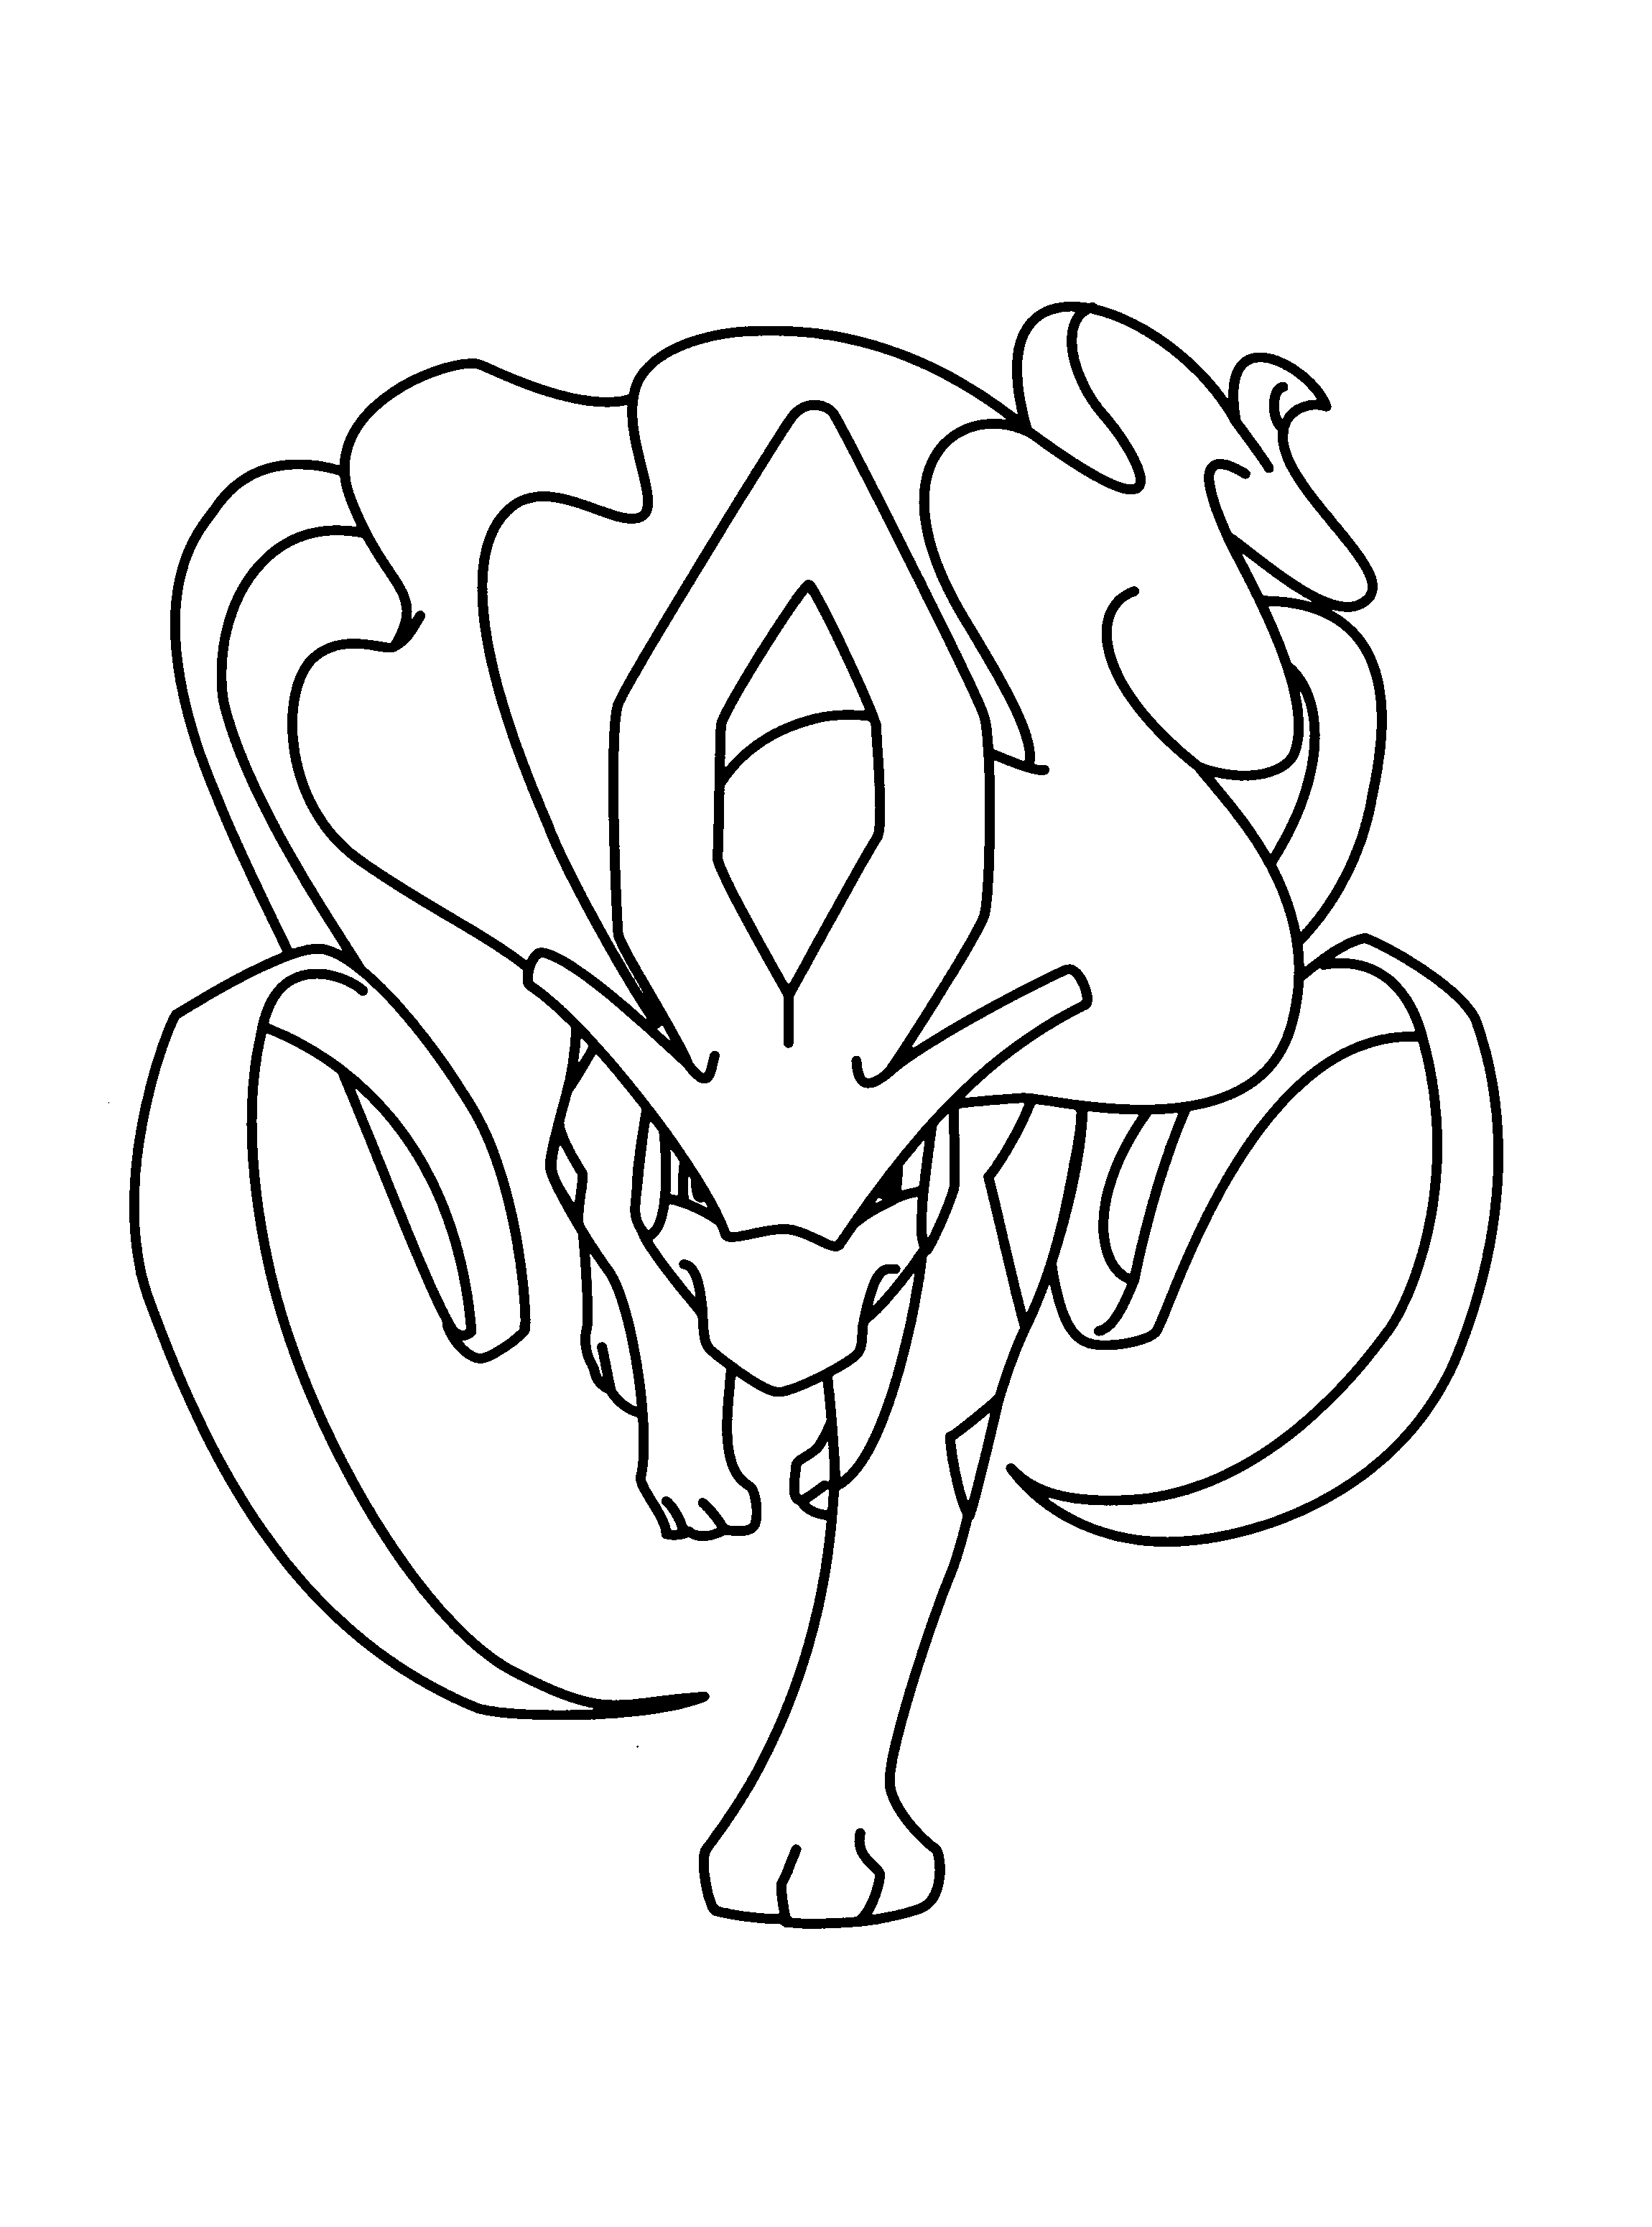 Pokemon Kyogre Drawing: Pokemon Suicune Coloring Pages, Pokemon ...